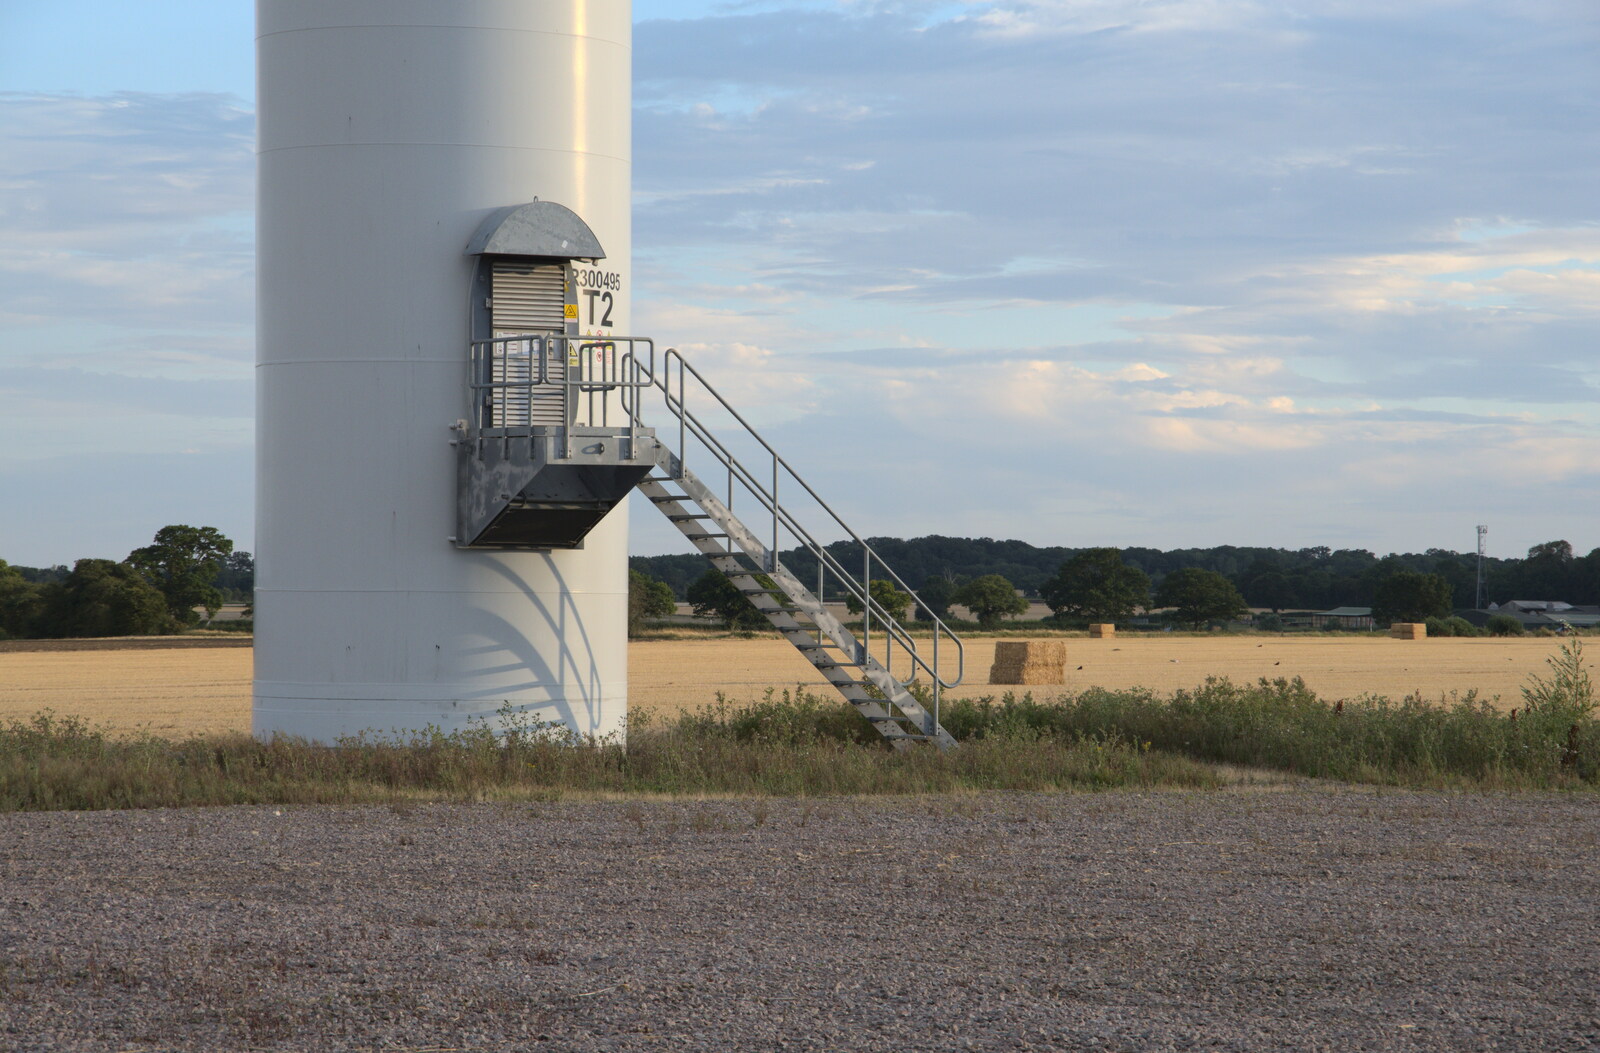 T2 - the wind turbine terminator from Eye Airfield with Mick the Brick, Eye, Suffolk - 5th August 2020